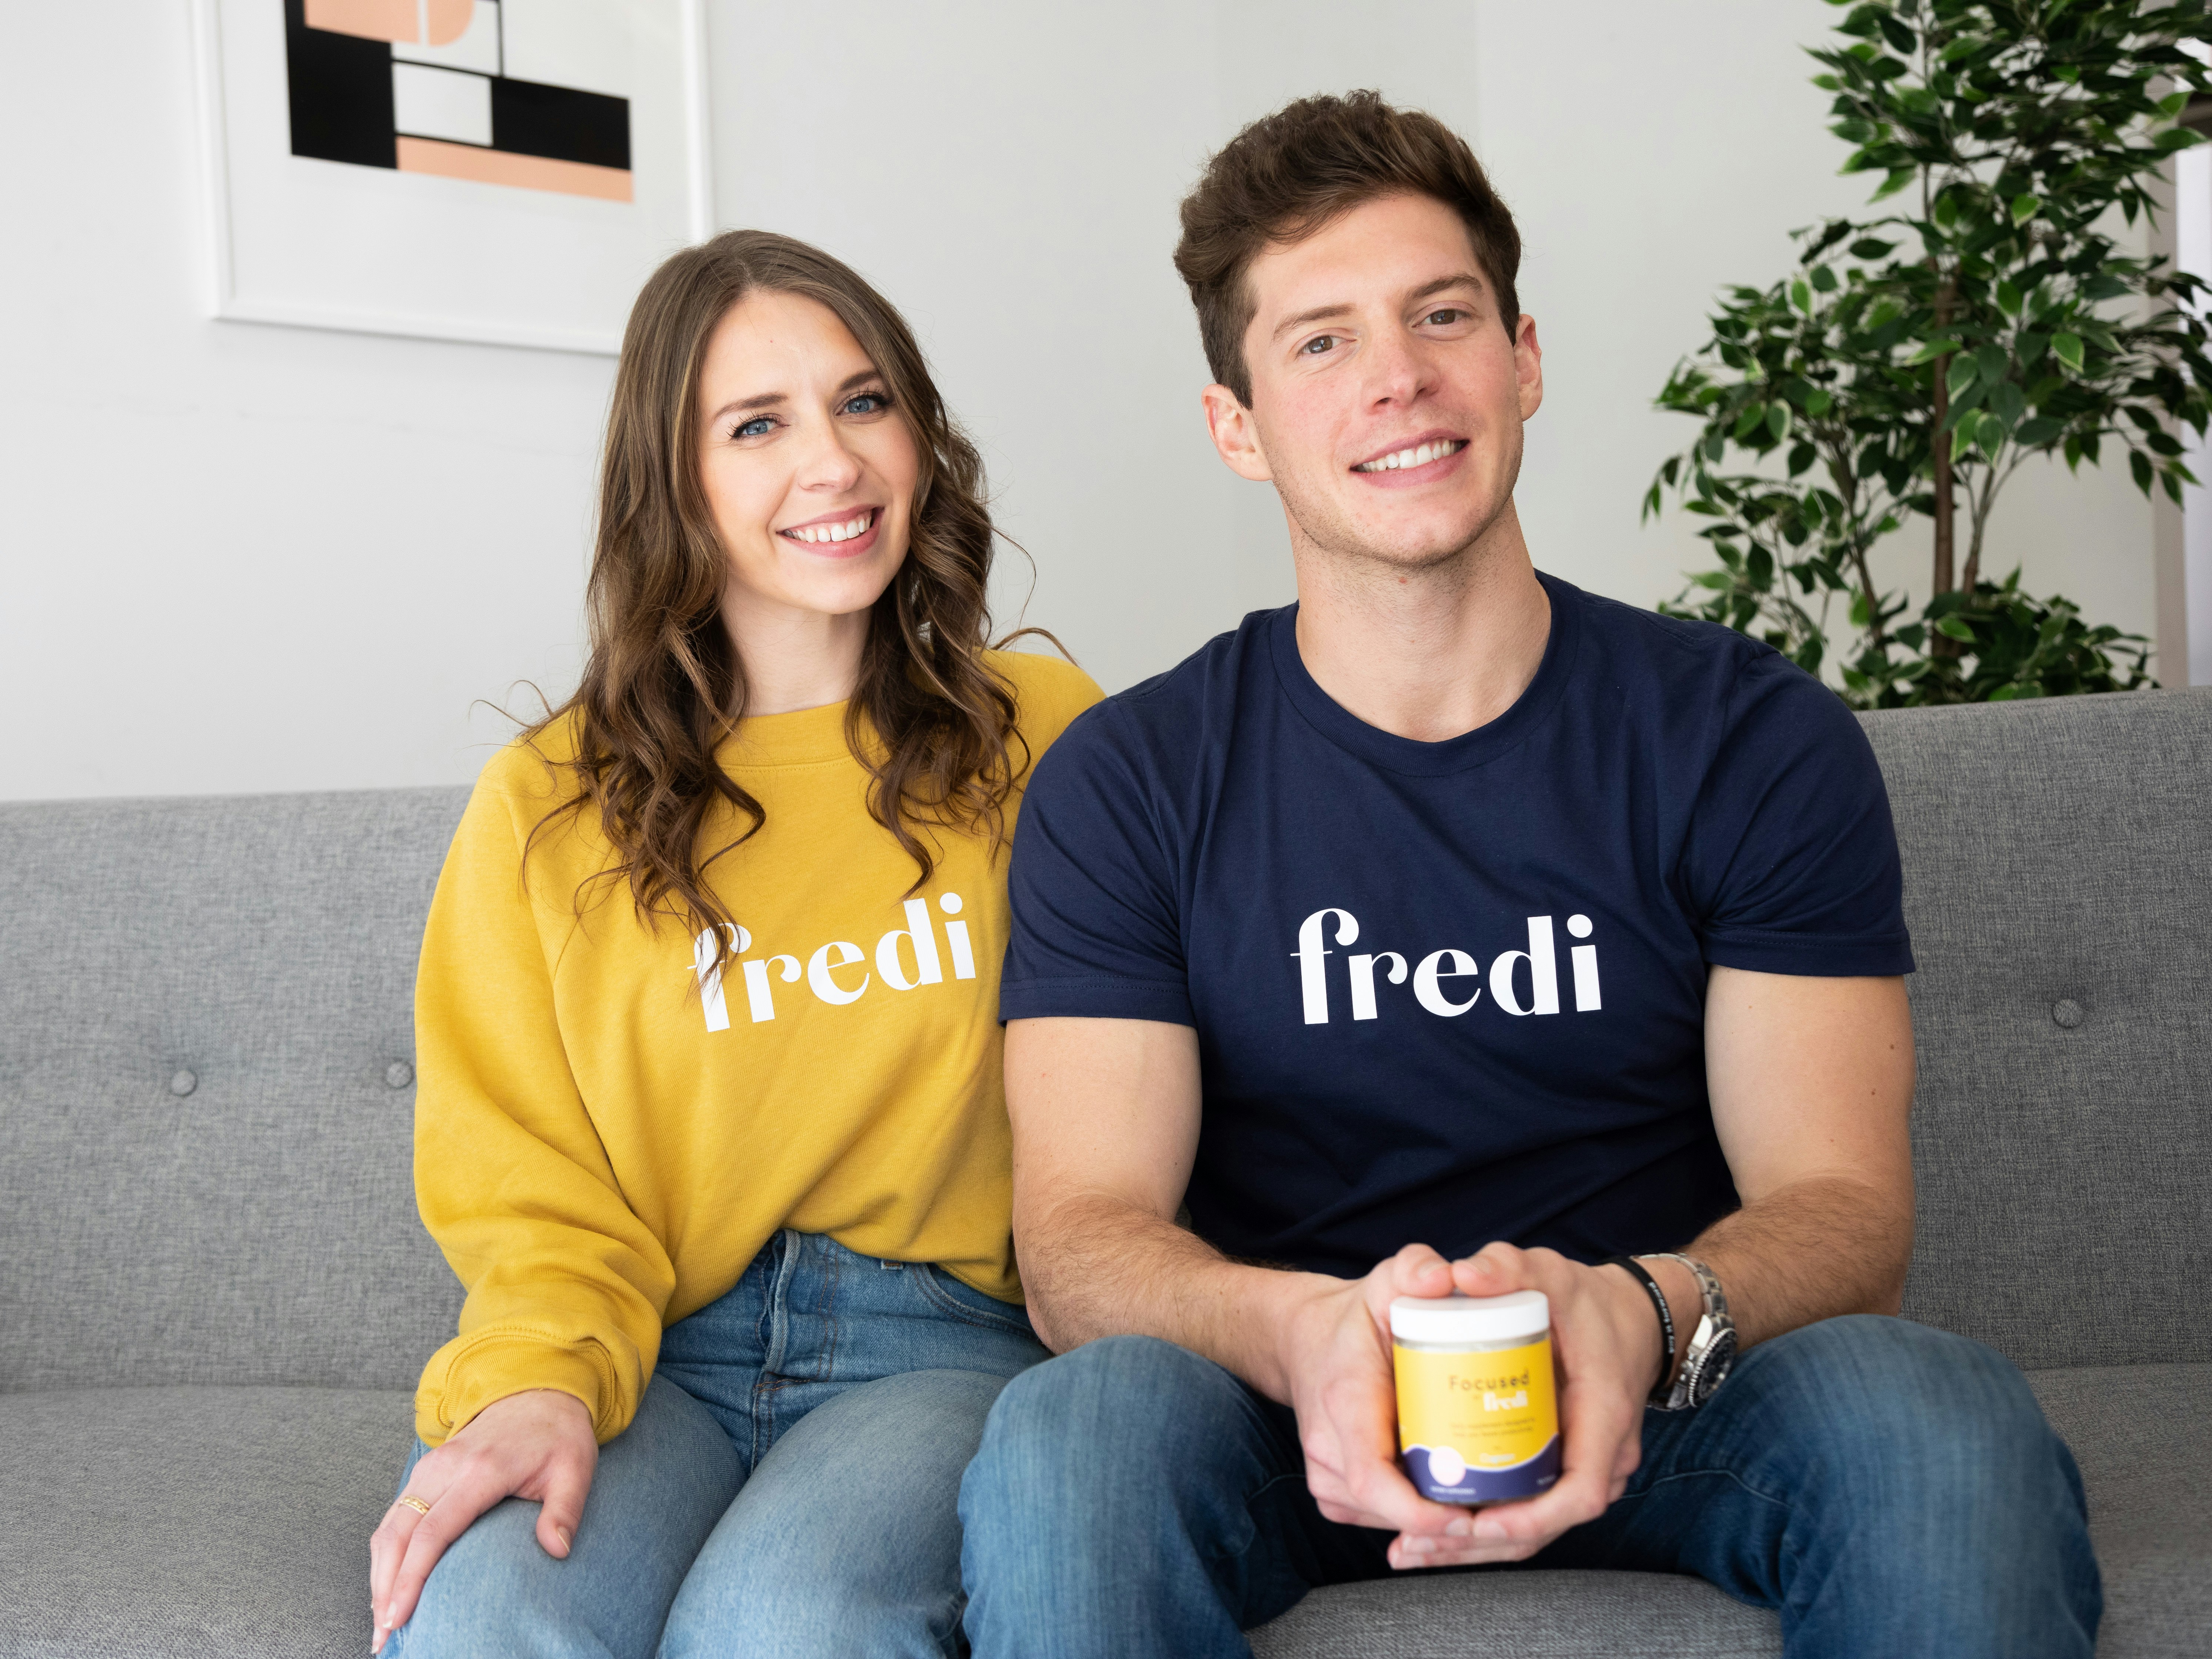 Follow us on Instagram @wearefredi Focused by Fredi is an all-natural daily supplement that helps you feel sharp, collected, and energized all day long. Give it a try with the code FOCUSEDAF at www.wearefredi.com